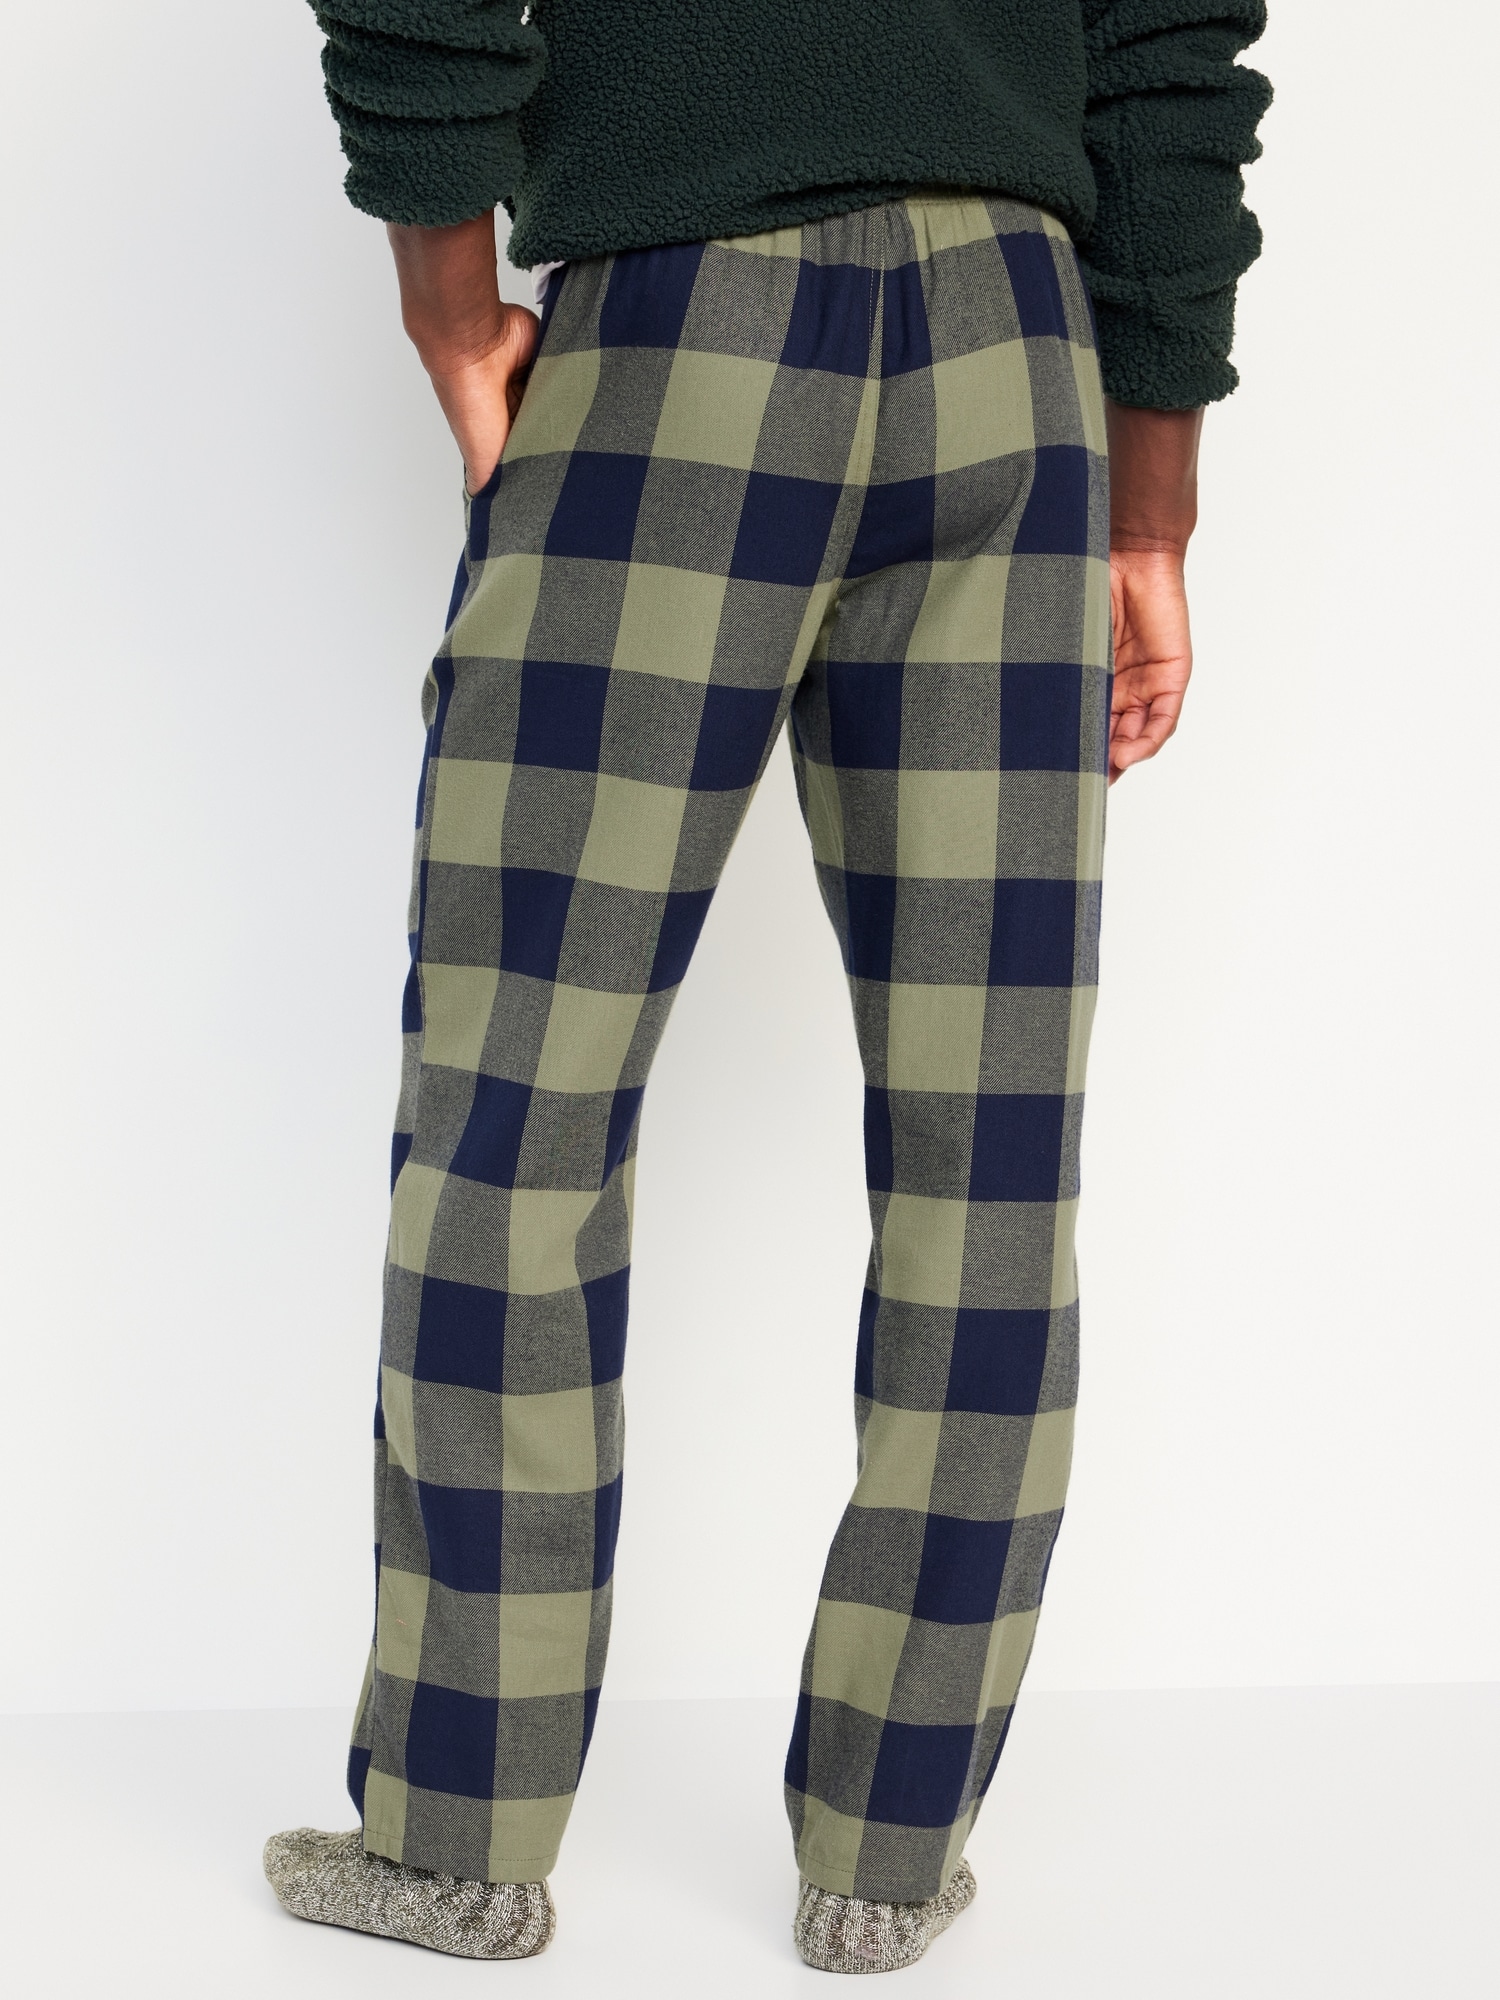 Matching Flannel Pajama Pants for Men | Old Navy